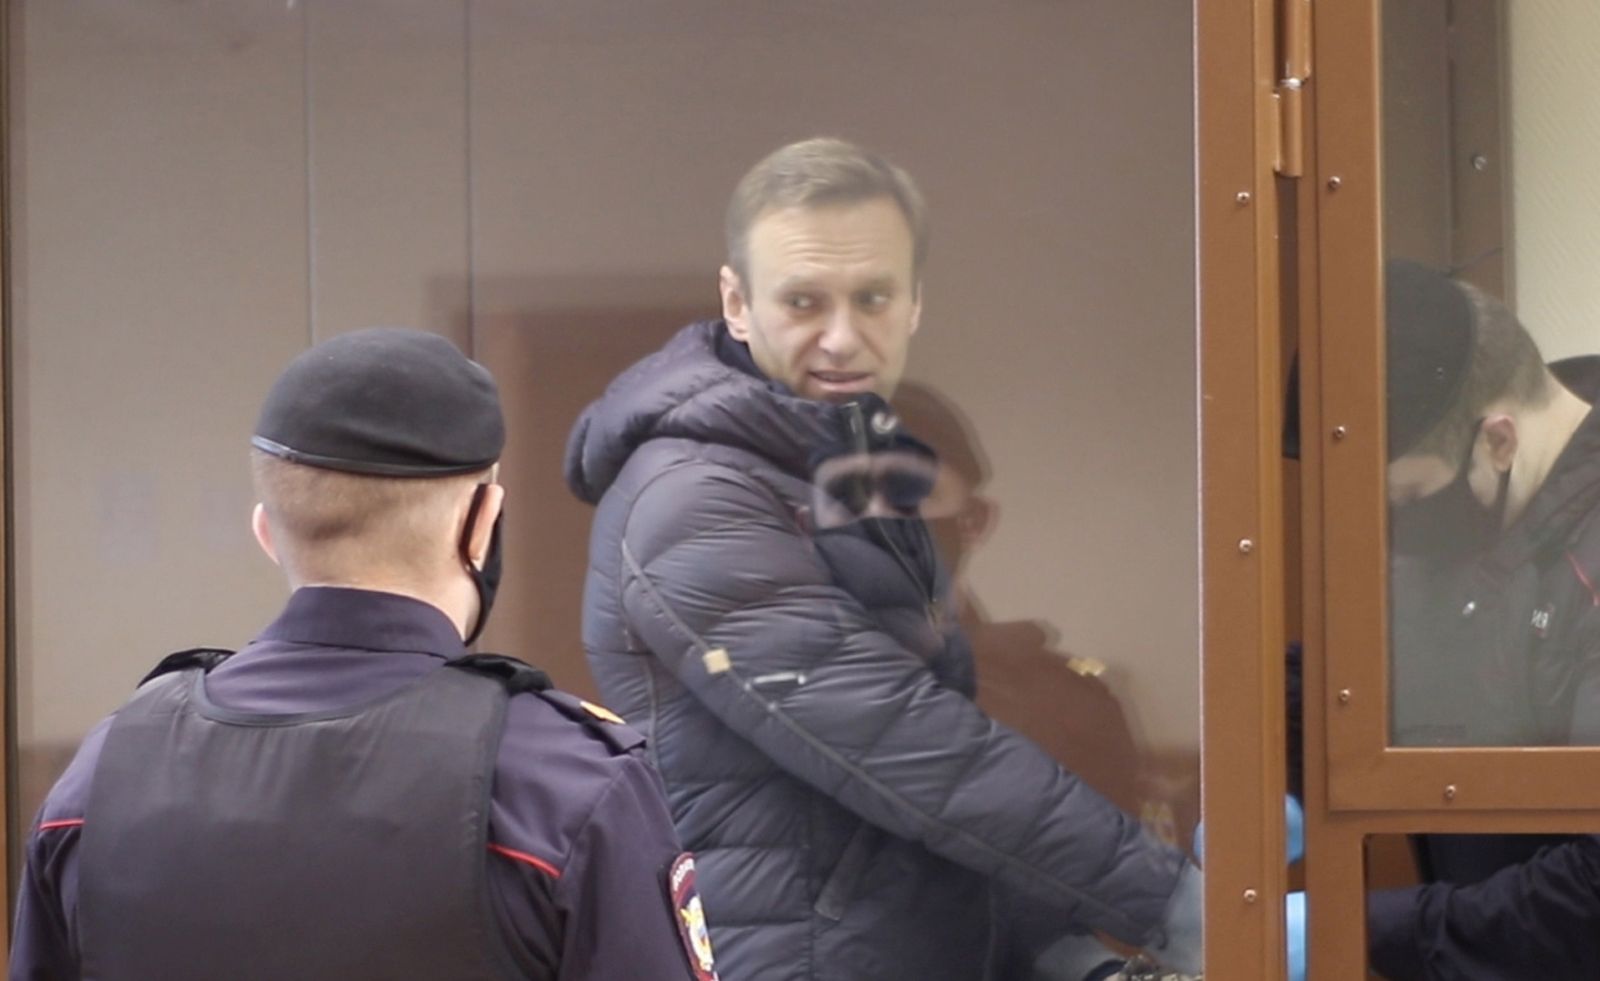 epa09015497 A still image taken from a handout video footage made available by the press service of the Babushkinsky district court shows Russian opposition leader Alexei Navalny (2-L) inside a glass cage prior to a hearing of a case on slander charges in Moscow, Russia, 16 February 2021. In June 2020 the Russian Investigative Committee opened a criminal case against Alexei Navalny on charges of slander against WWII veteran Ignat Artemenko after Navalny's comment about a video promoting the amendments to the Russian Constitution.  EPA/BABUSHKINSKY DISTRICT COURT PRES -- MANDATORY CREDIT -- BEST QUALITY AVAILABLE -- HANDOUT EDITORIAL USE ONLY/NO SALES